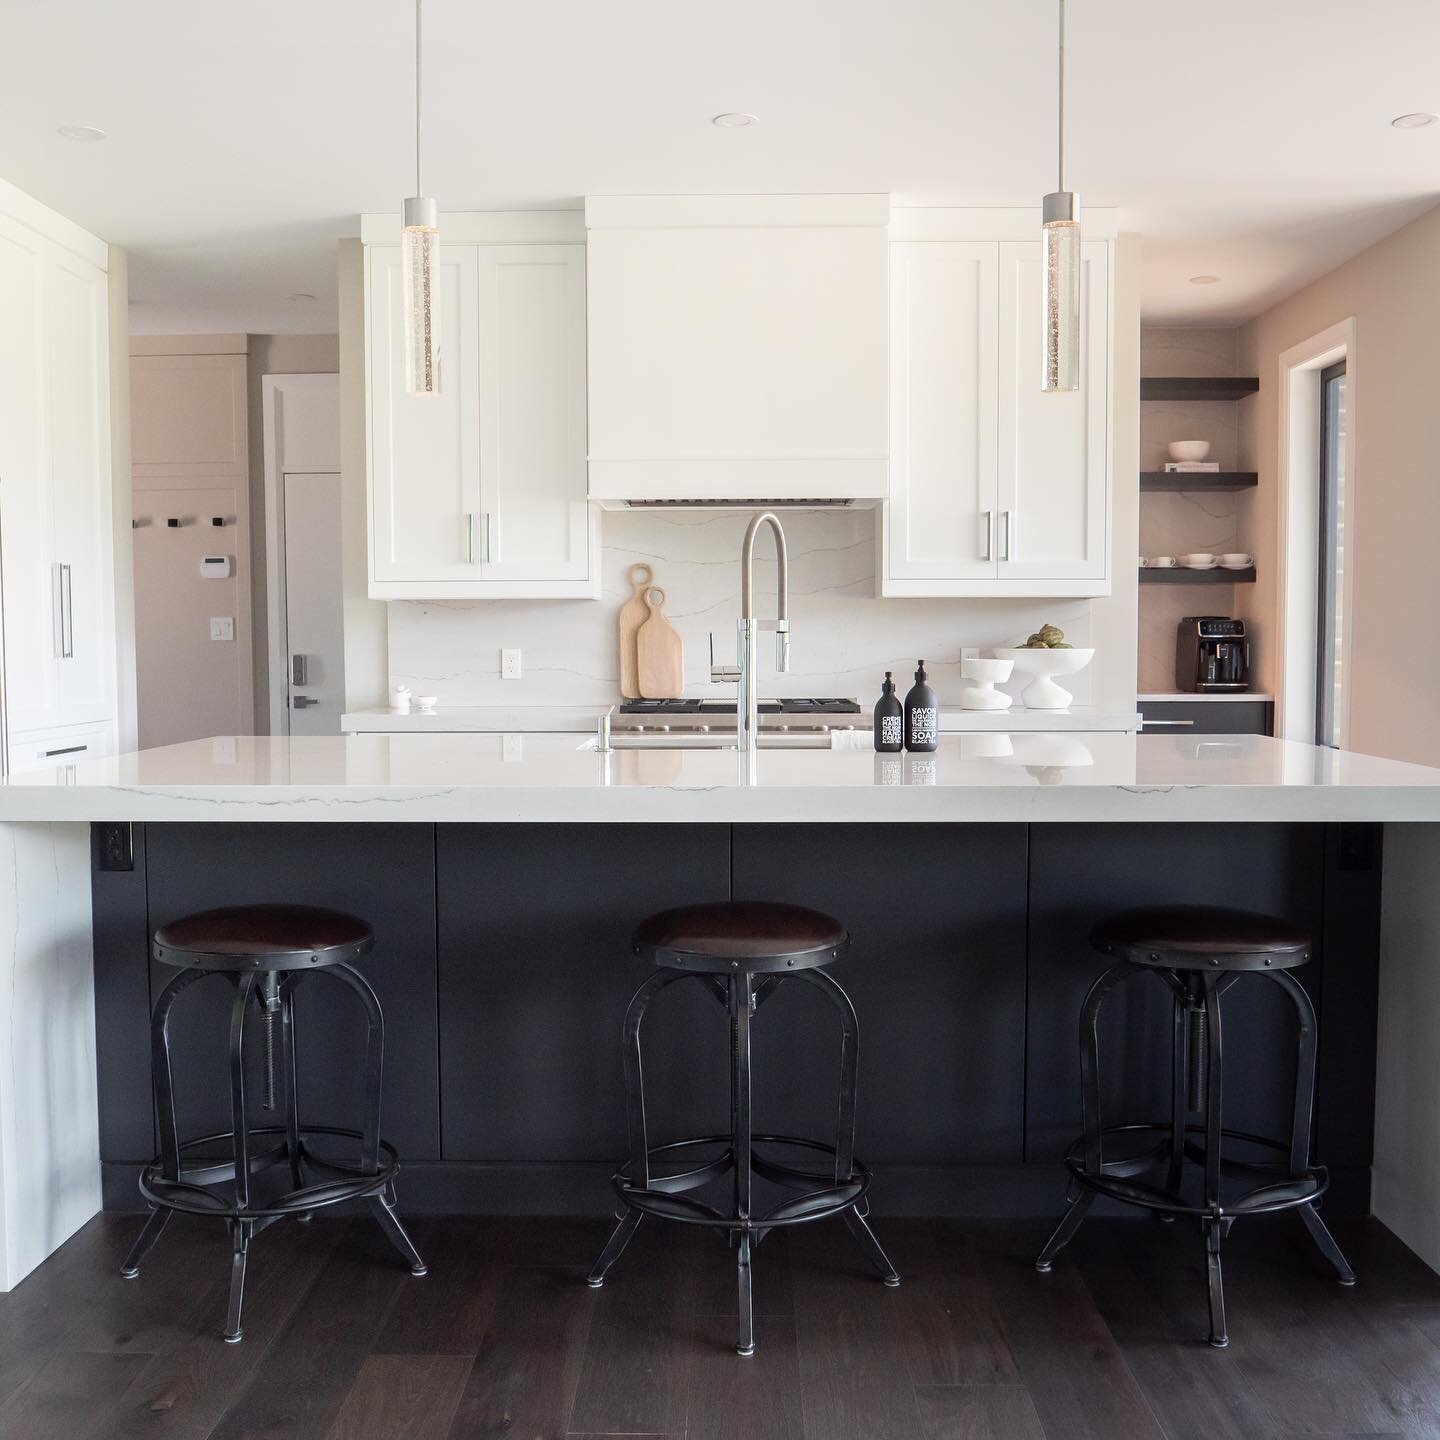 Another one from our Puslinch Project!
#homerenovation #newconstruction #kitchendesign #kitchenrenovation #whitekitchen #guelphbusiness